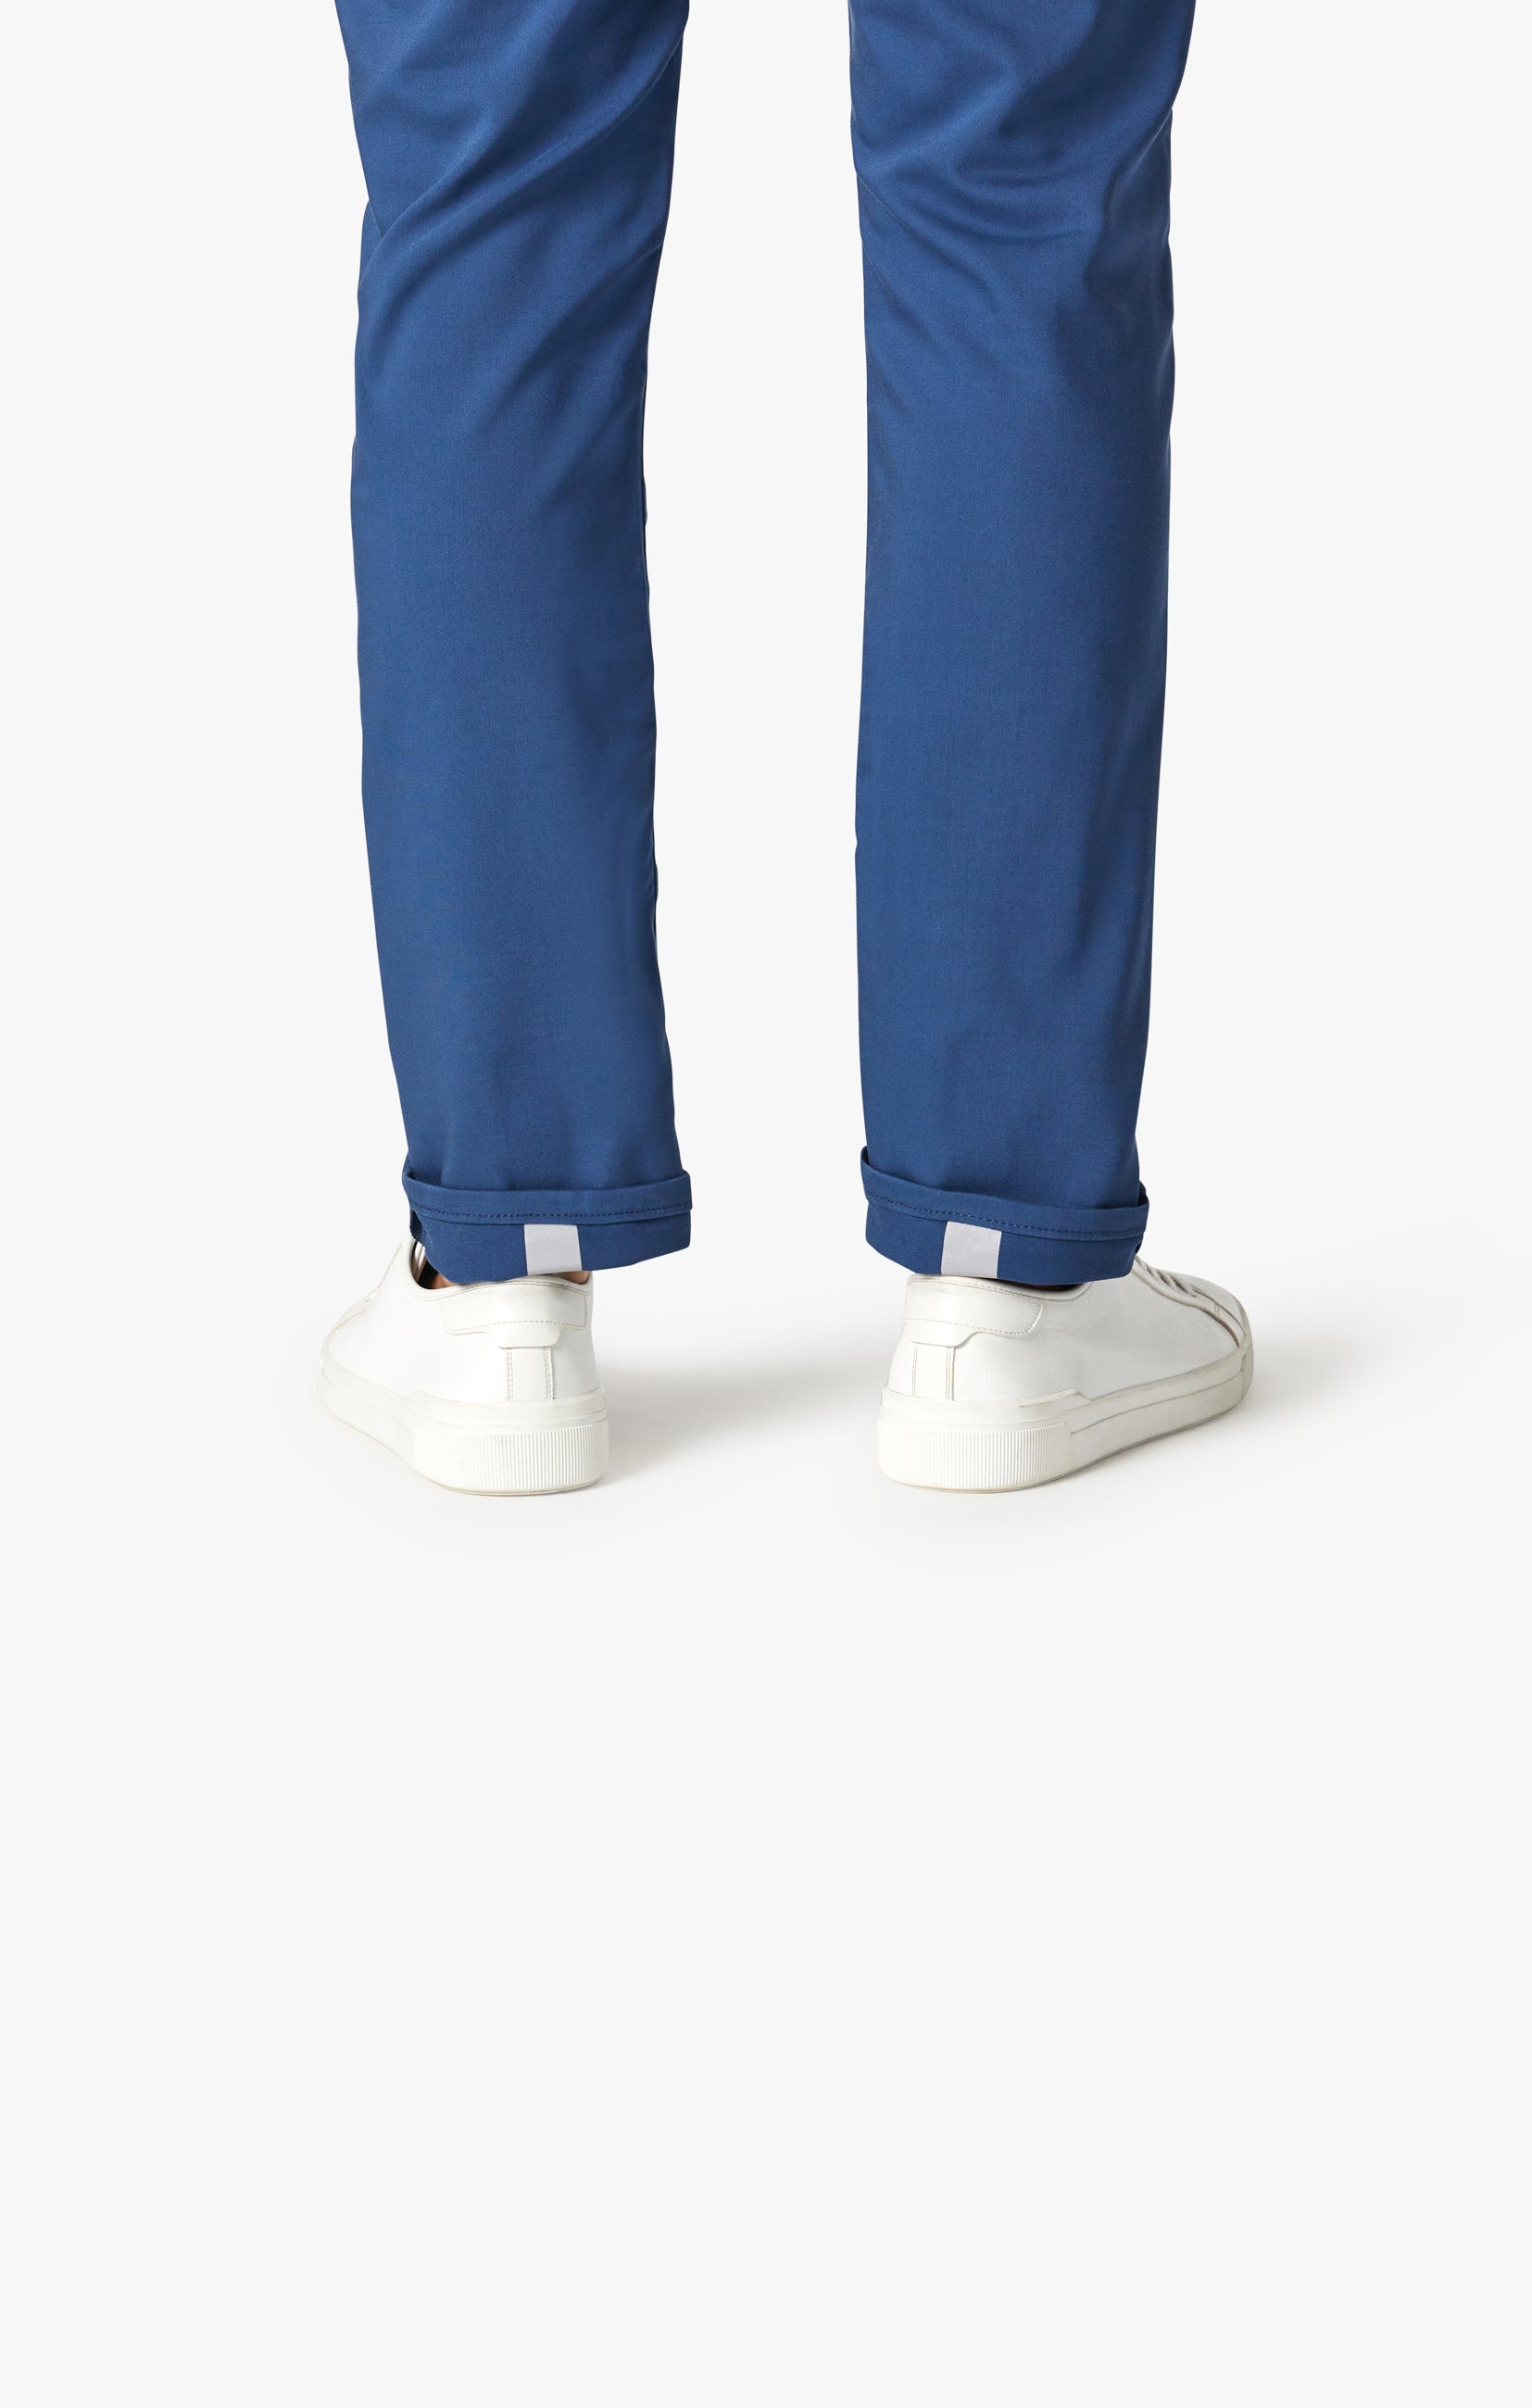 Courage Straight Leg Jeans in Cobalt Commuter Image 4